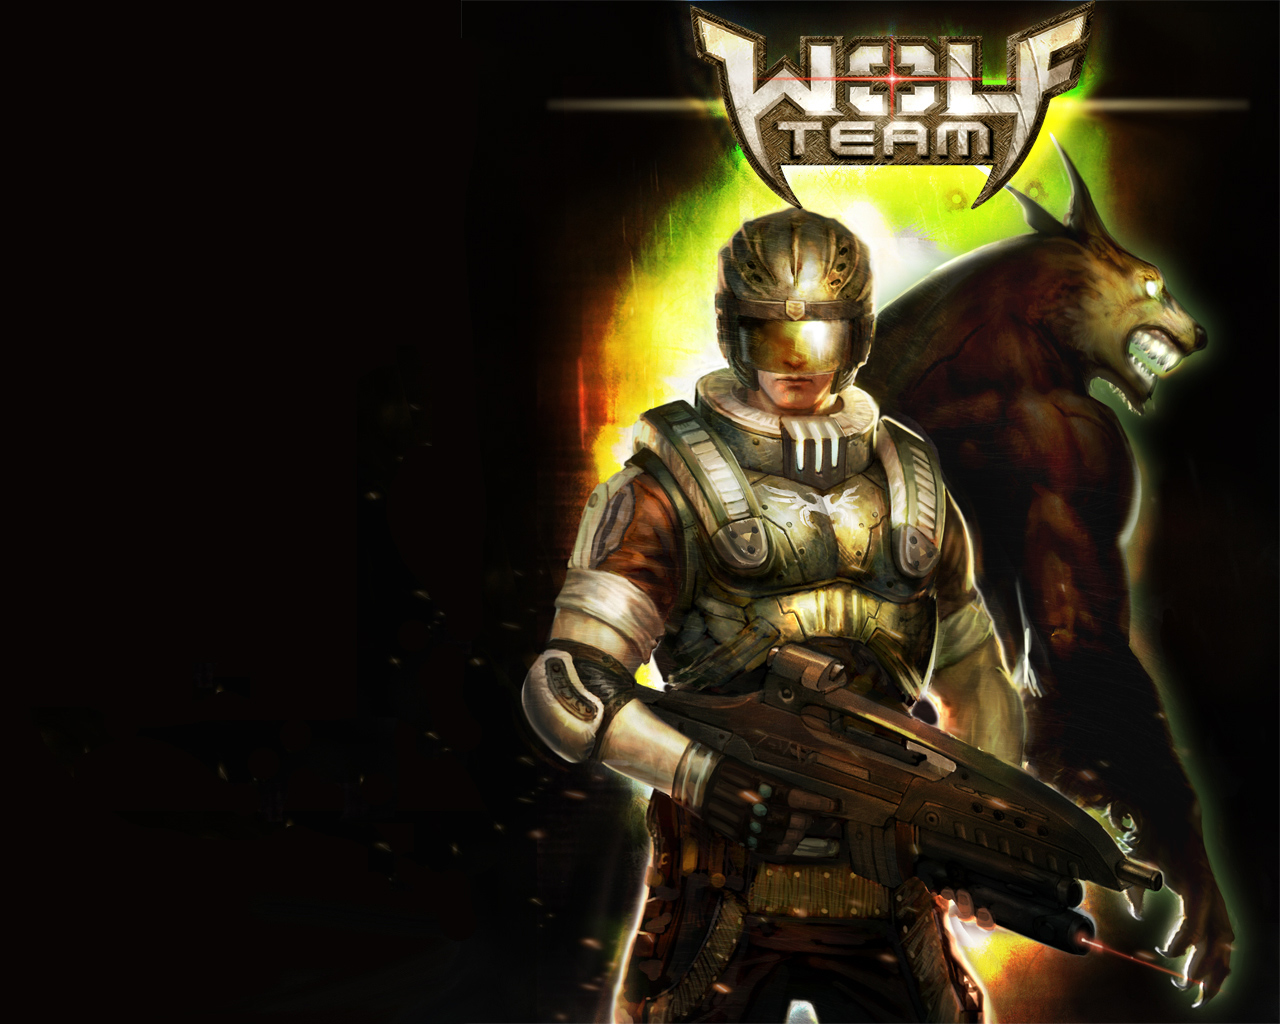 Wolfteam Backgrounds, Compatible - PC, Mobile, Gadgets| 1280x1024 px